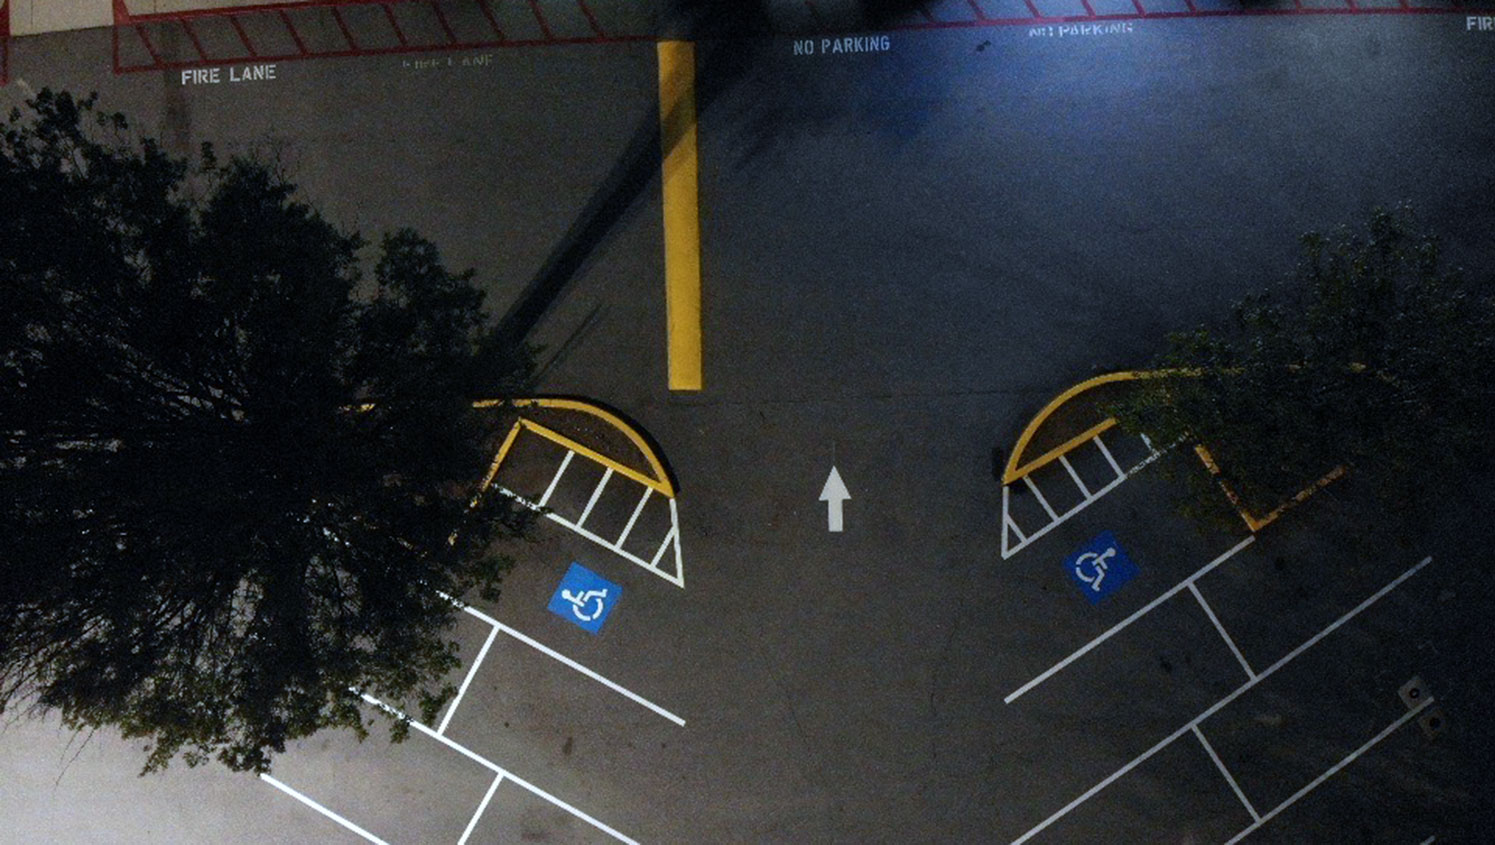 newly striped parking area shown from above